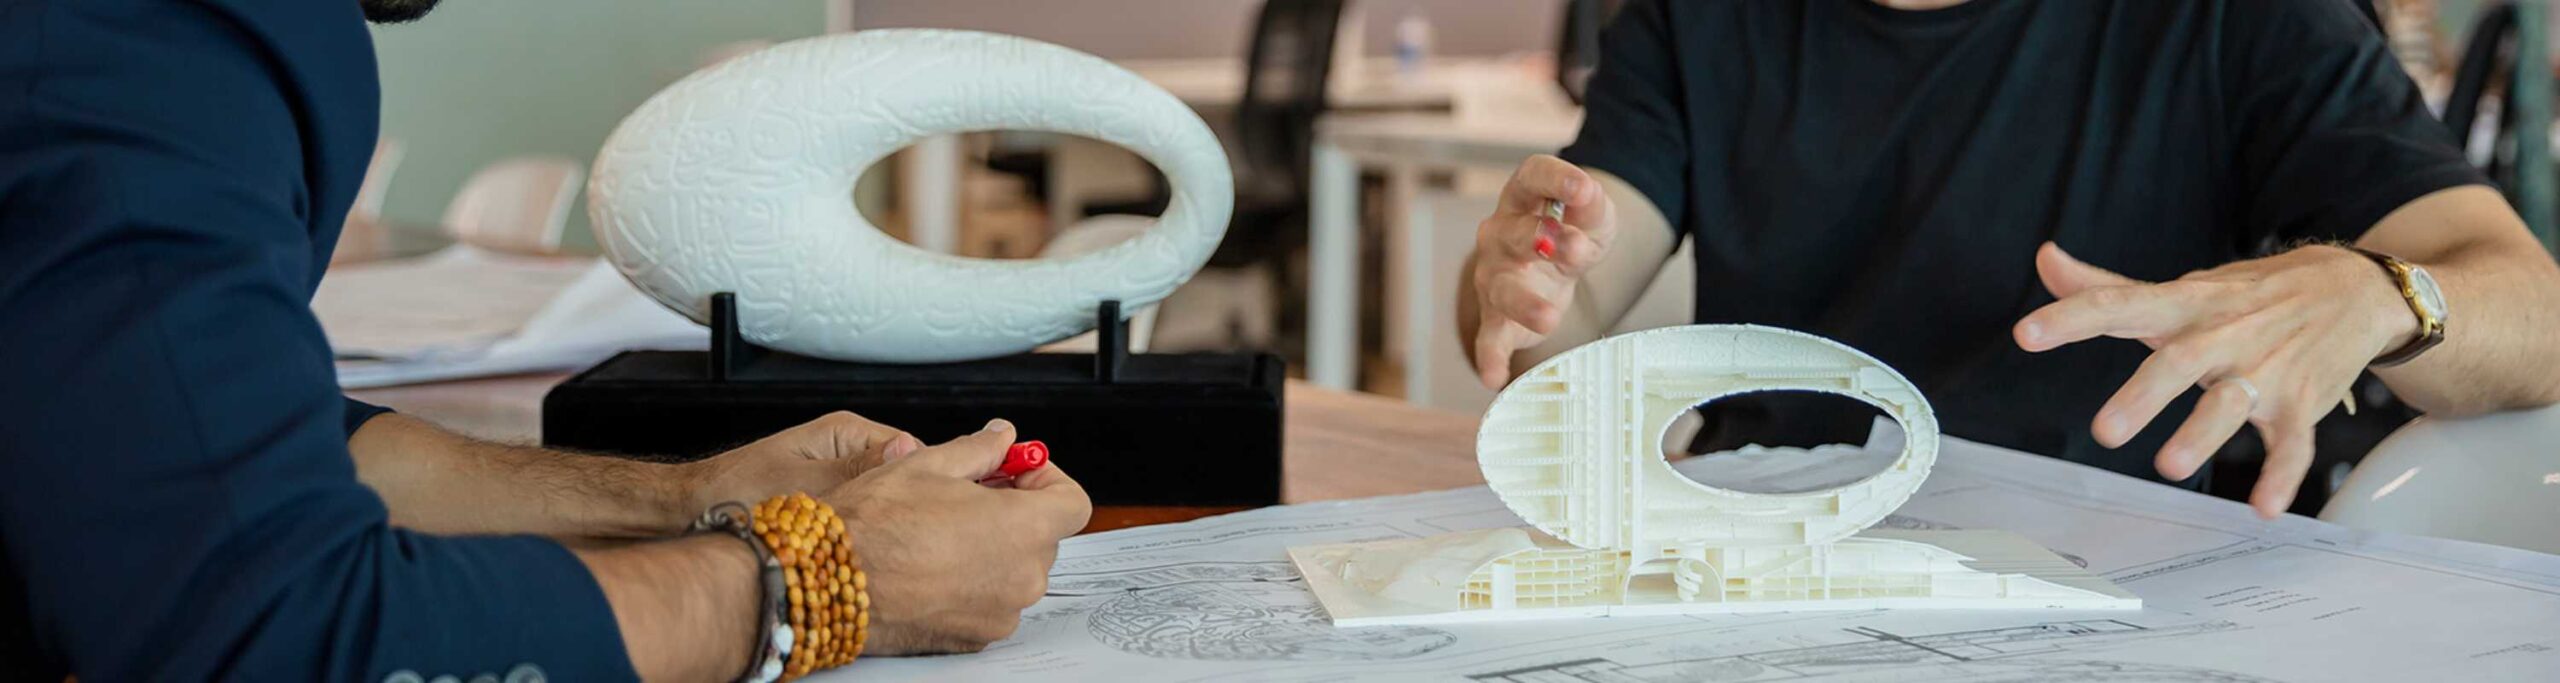 How to start creating 3D printed art right now